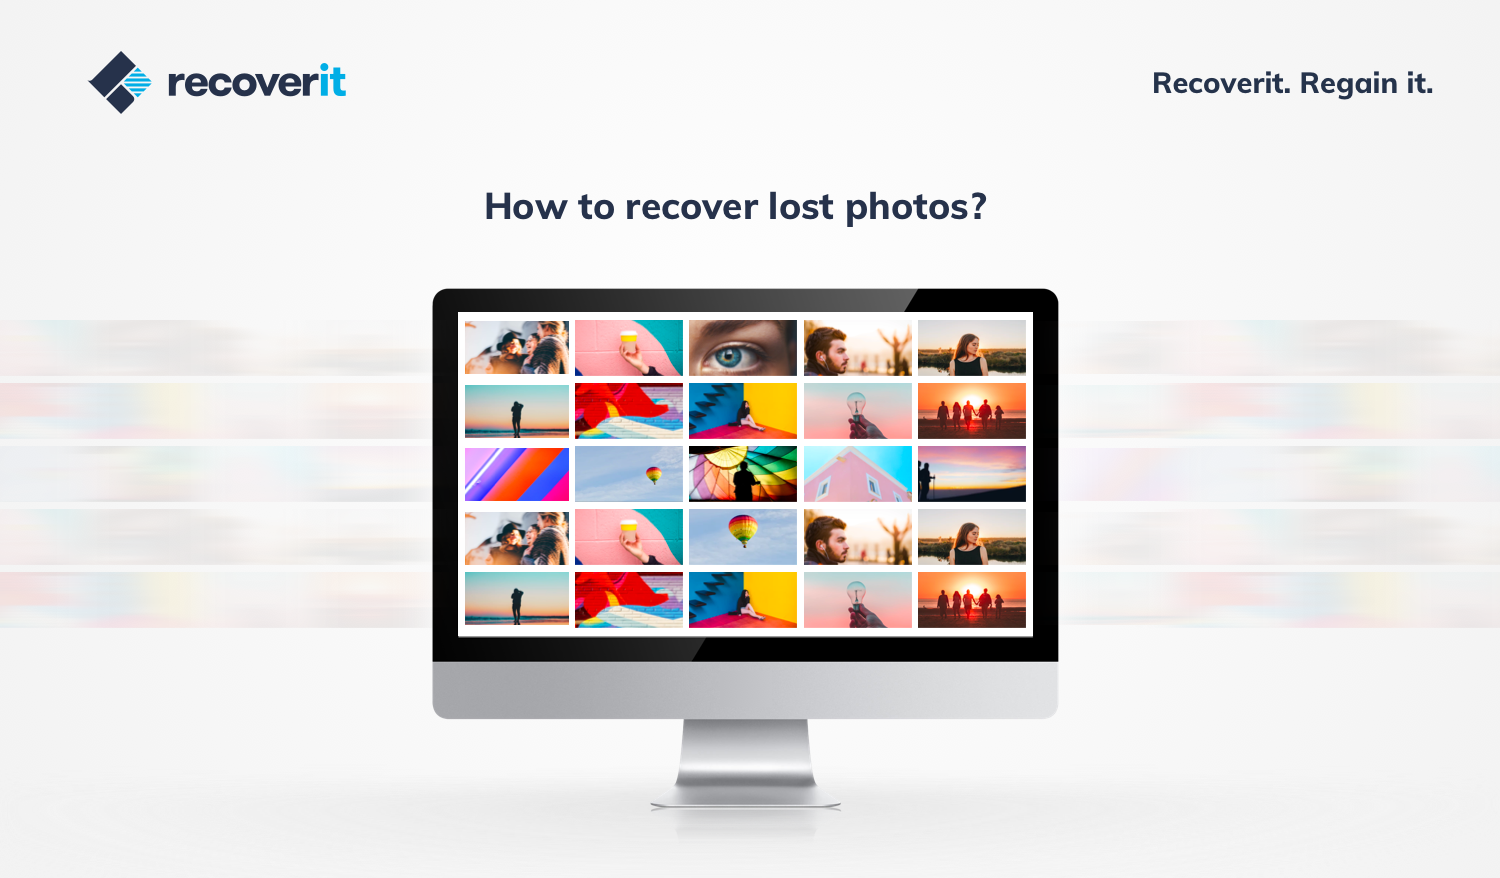 wondershare recoverit data recovery software download